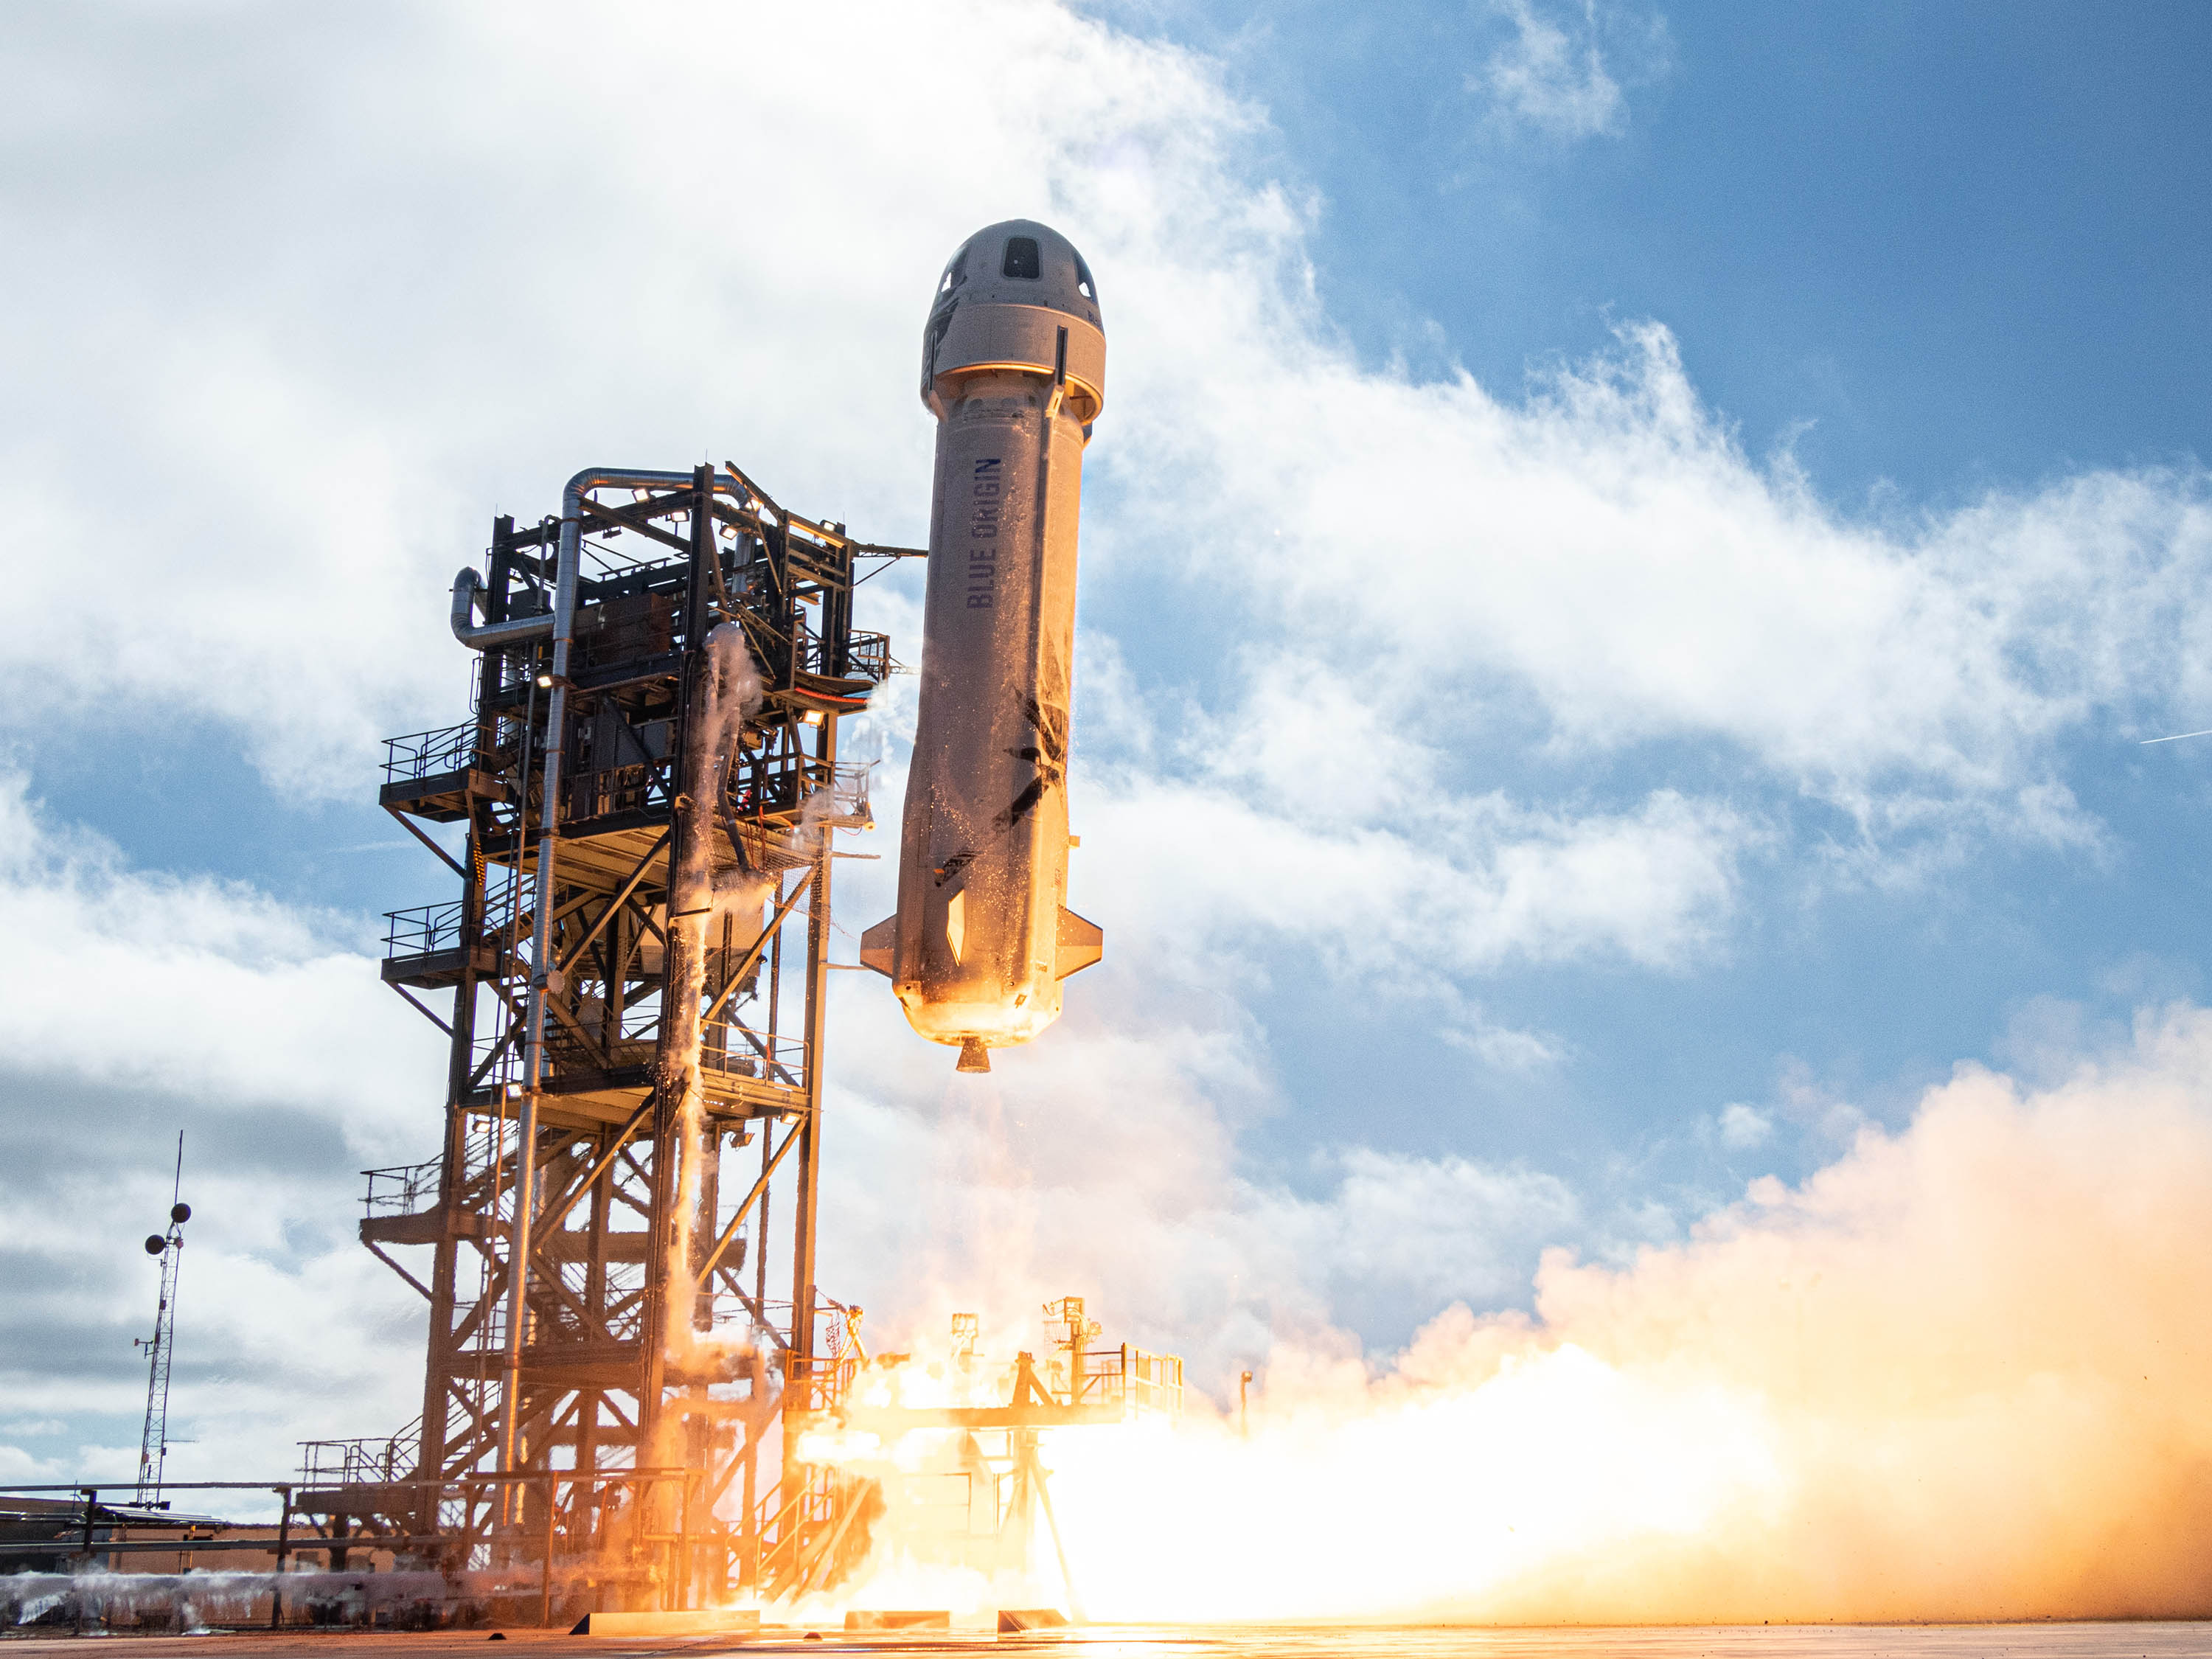 New Shepard lifts off on its 12th mission on December 11, 2019. (Blue Origin)